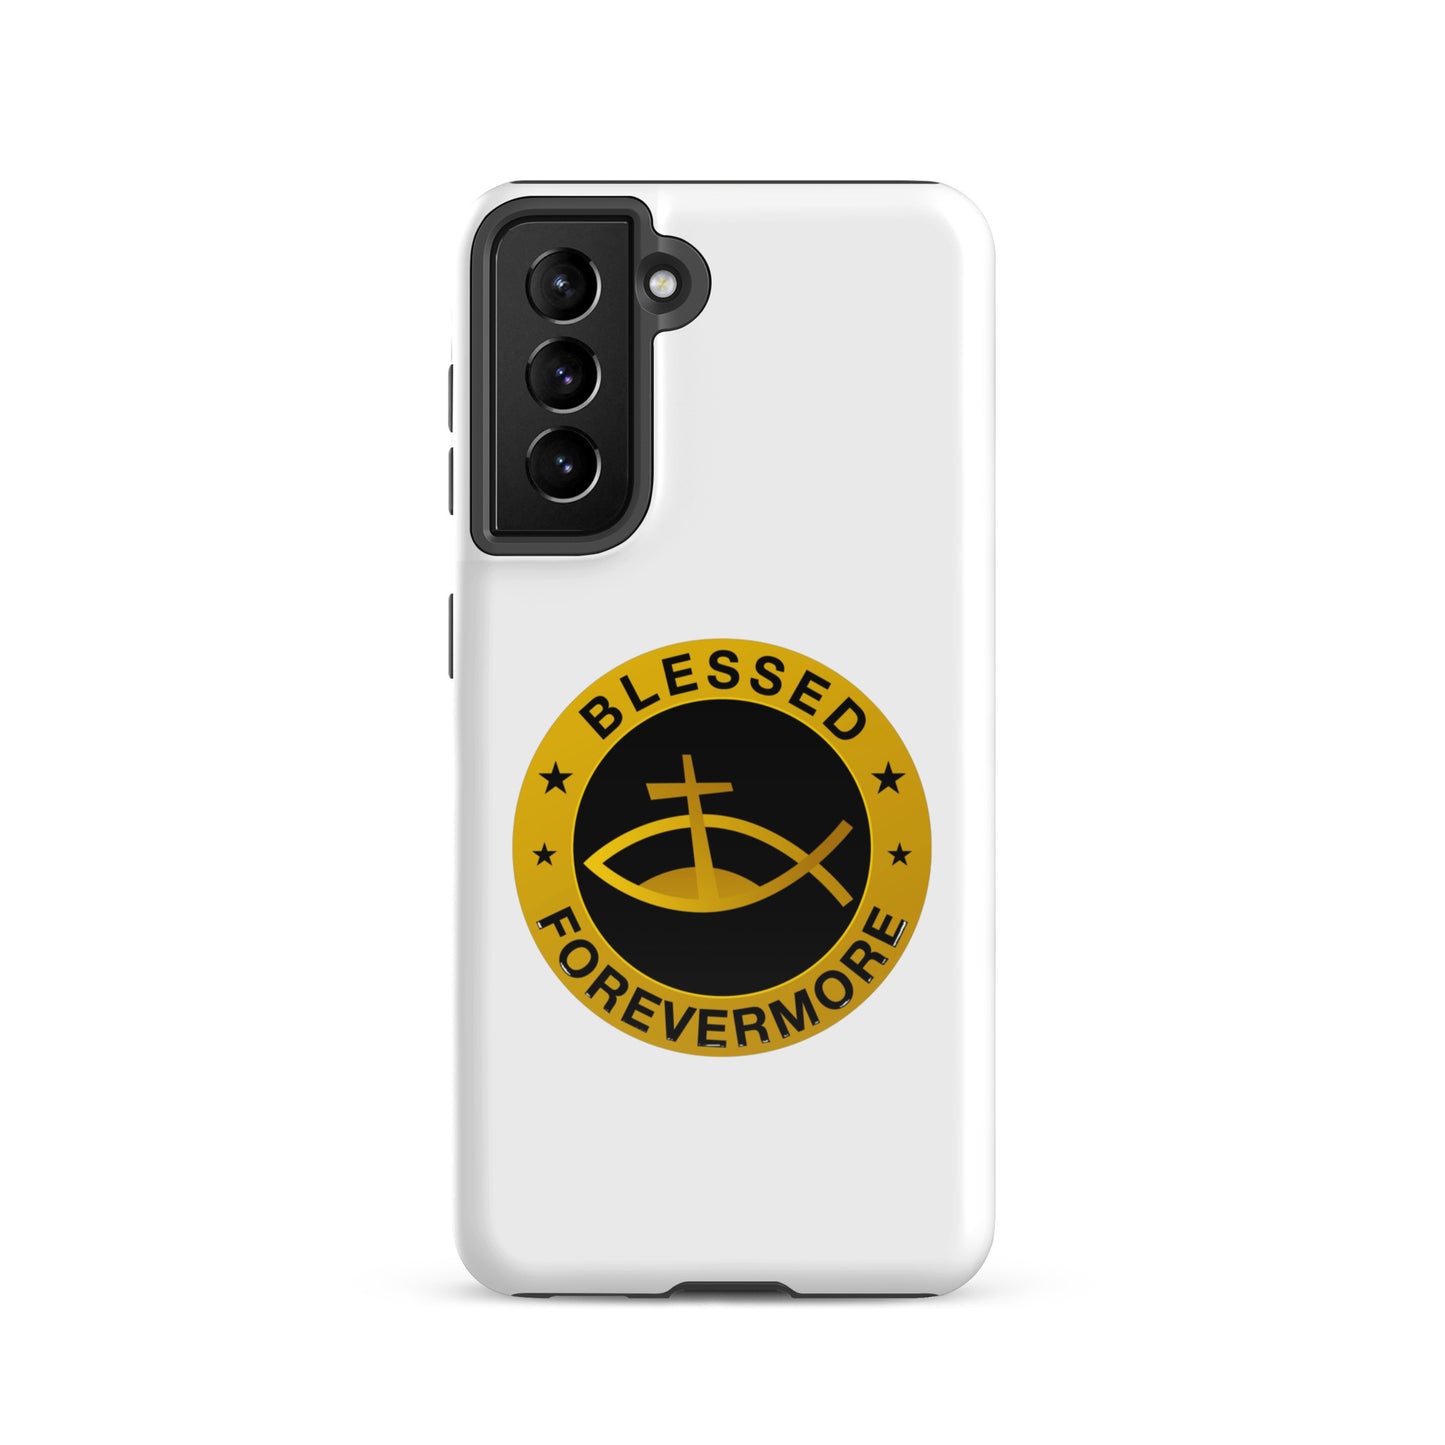 Blessed Forevermore - Tough case for Samsung®